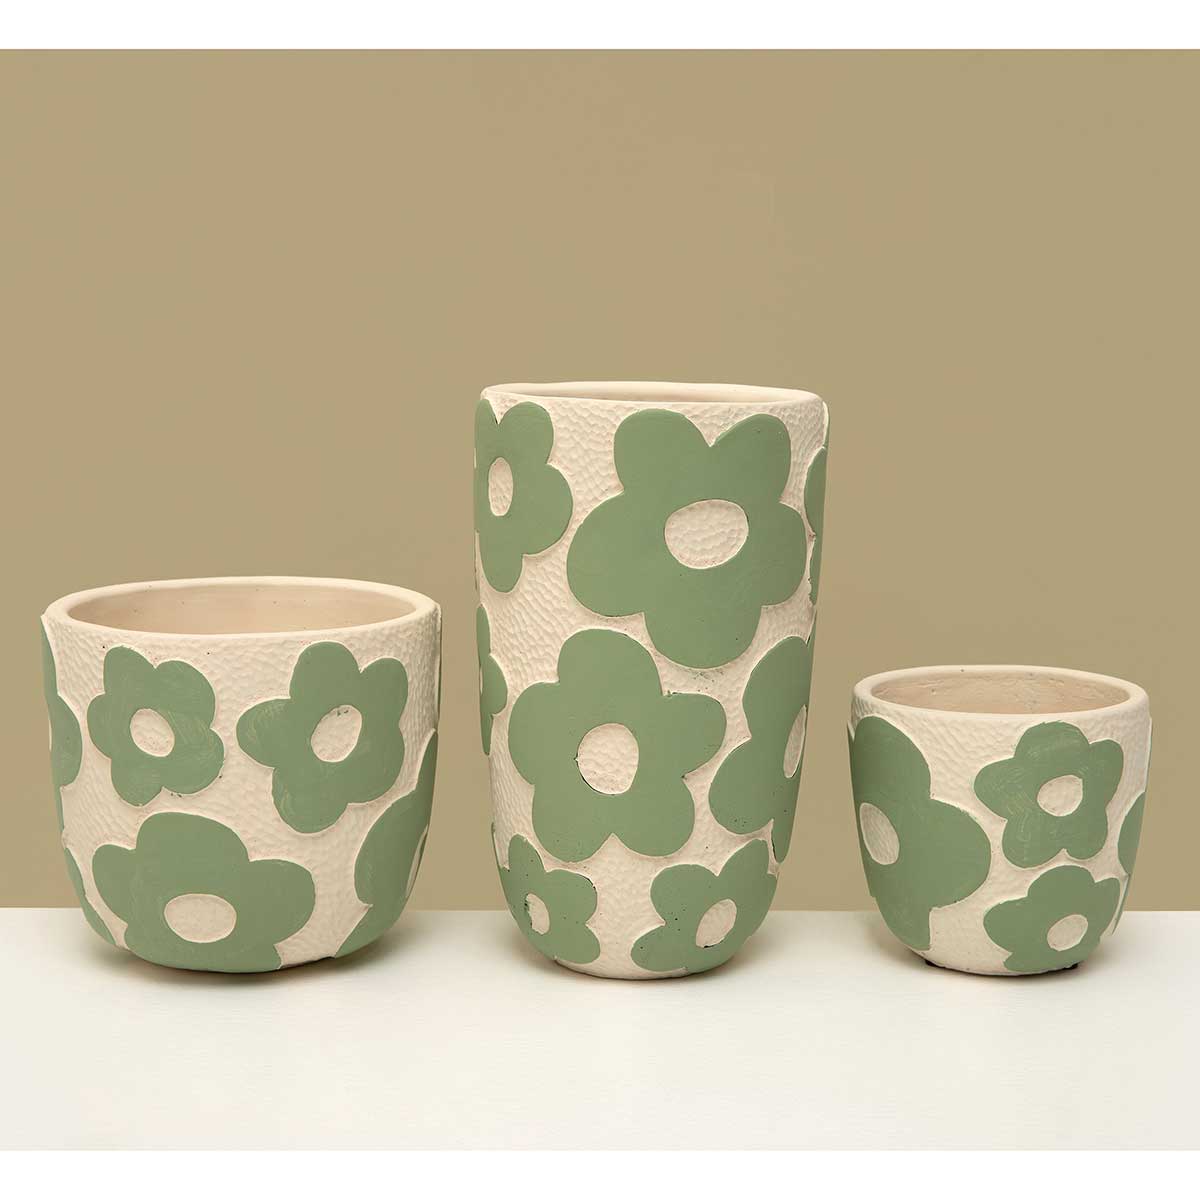 POT FLOWER SMALL 4.25IN X 4IN WHITE/GREEN CONCRETE - Click Image to Close